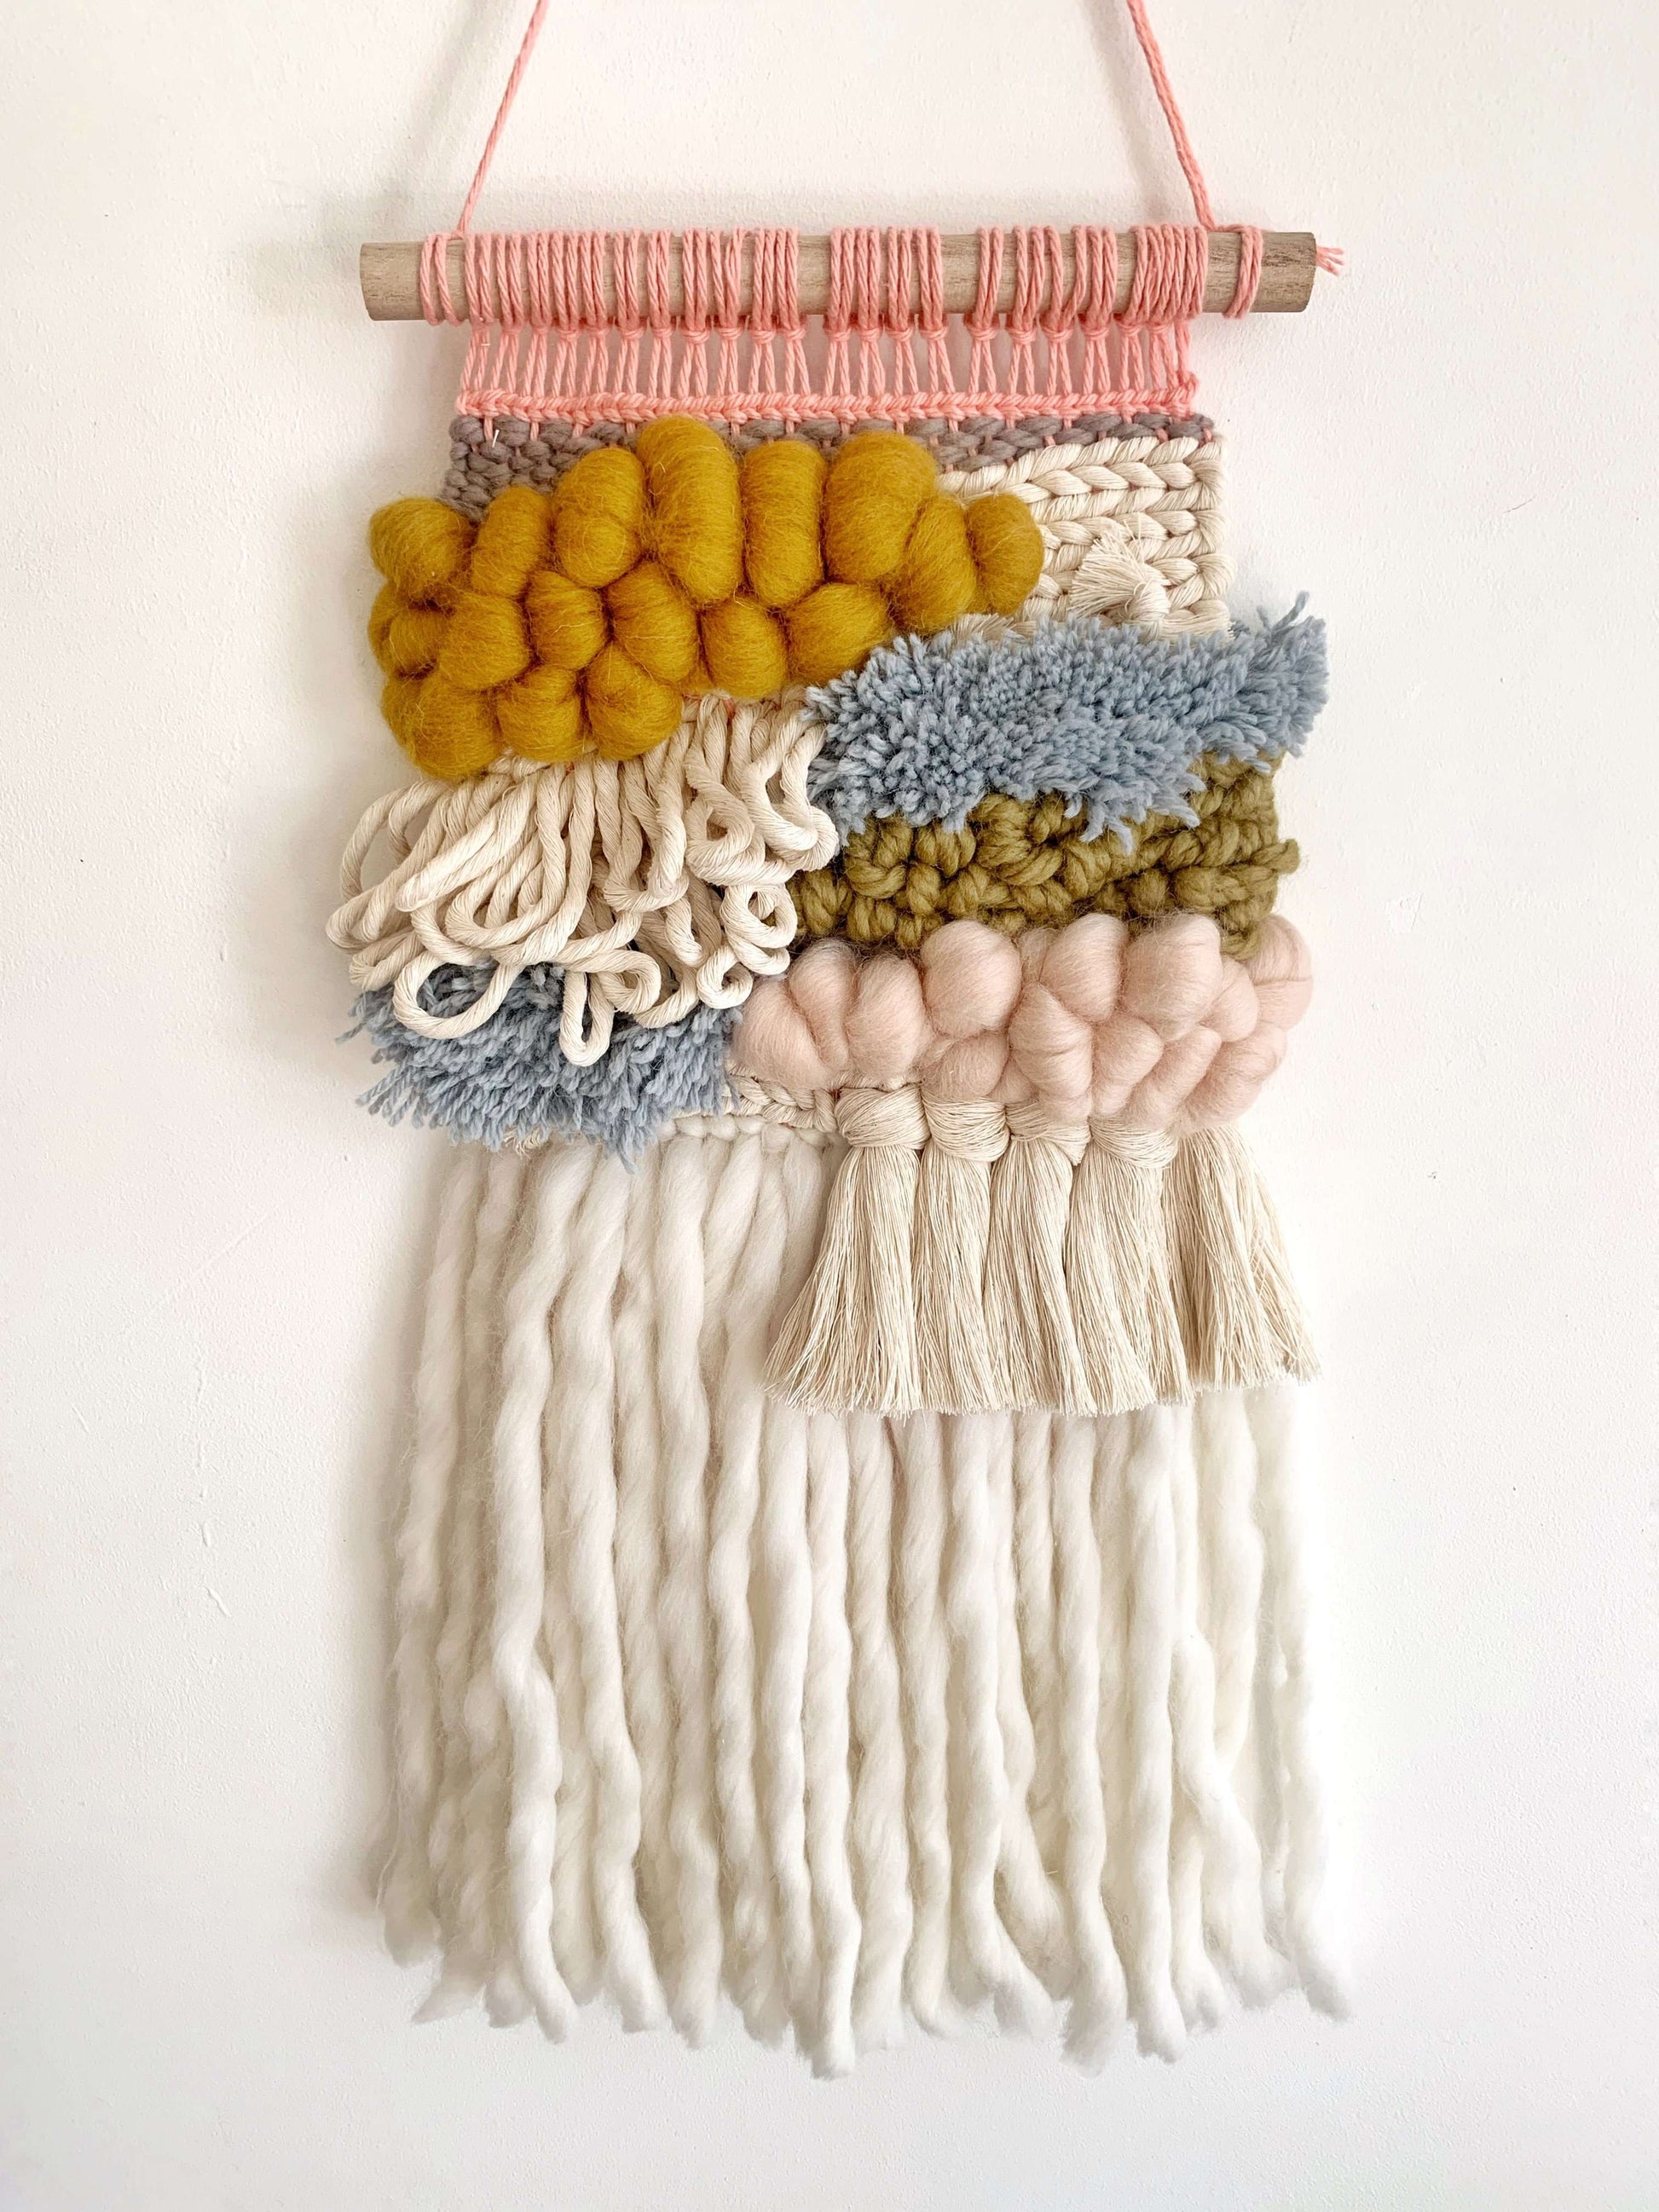 Signs of Spring | Small Woven Wall Hanging The Joyful Studio